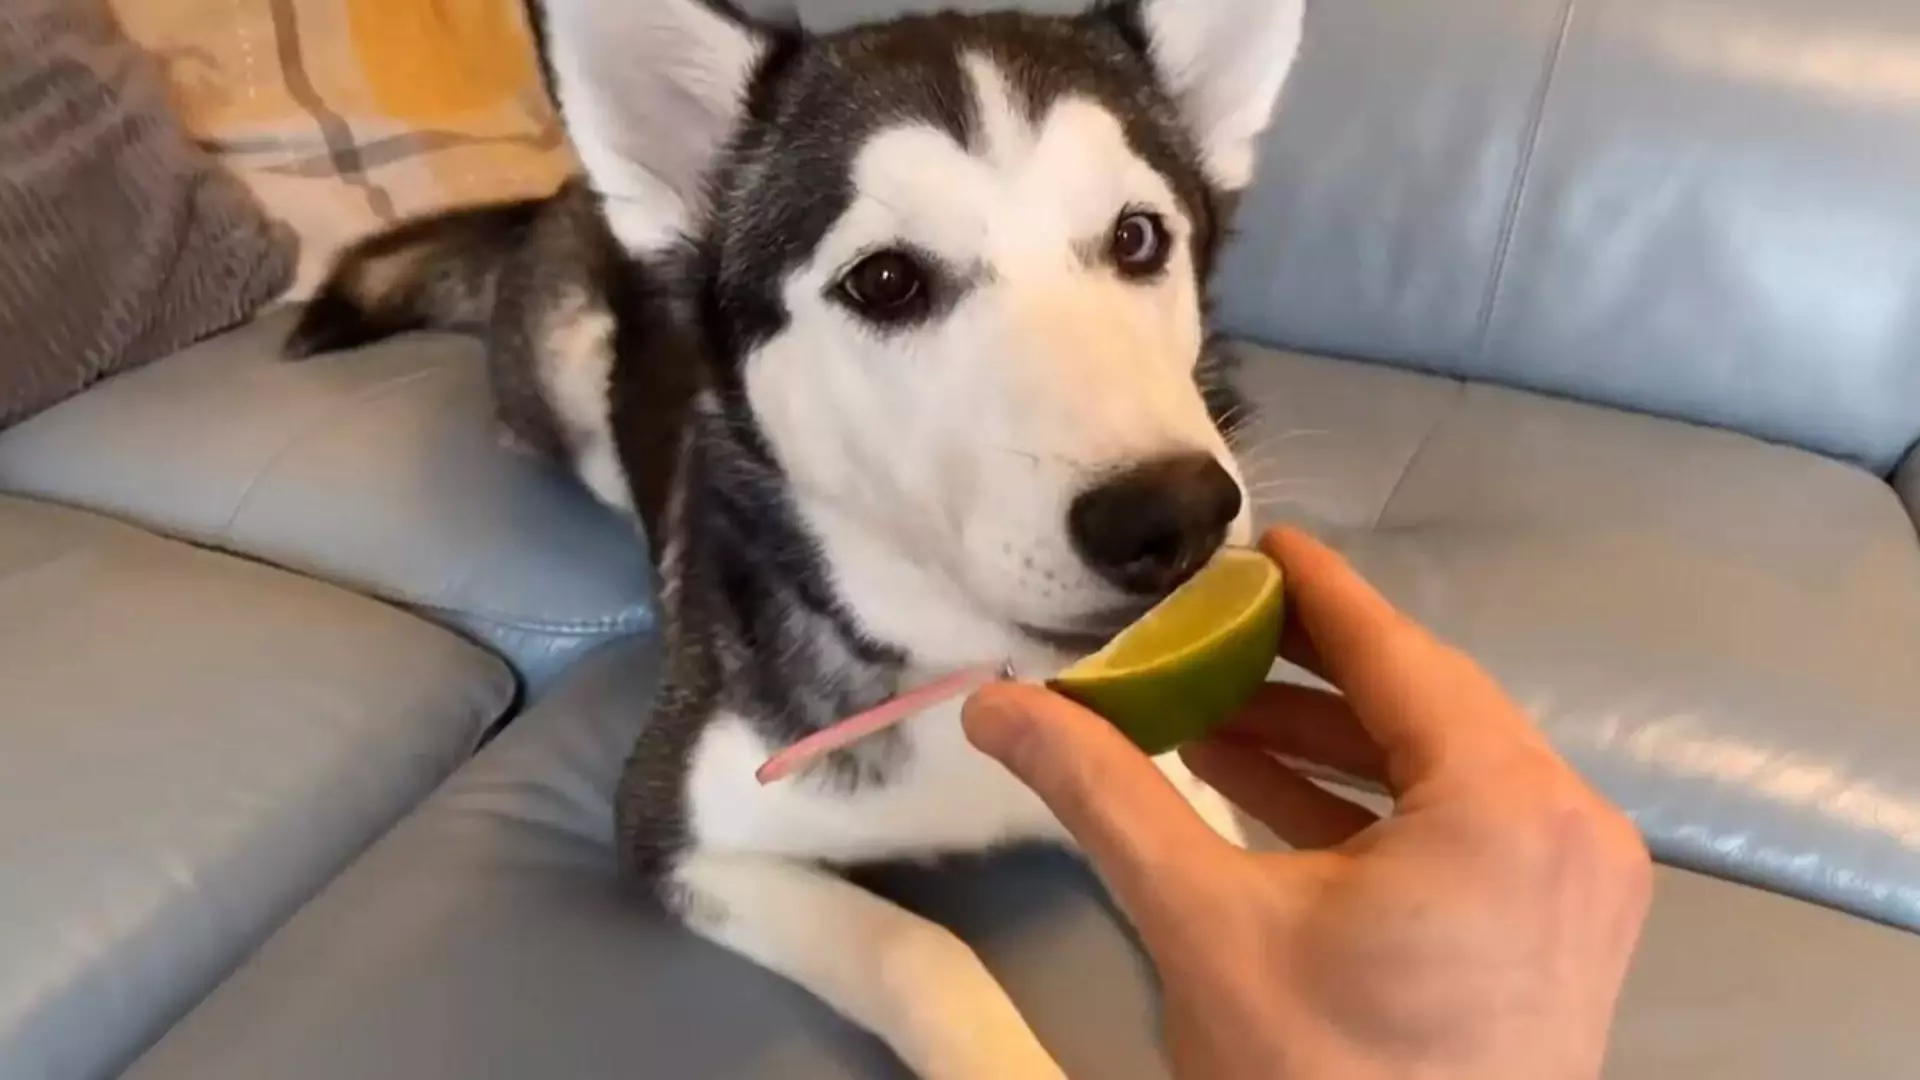 Can dogs eat lemons? Fruits that dogs should not eat more of